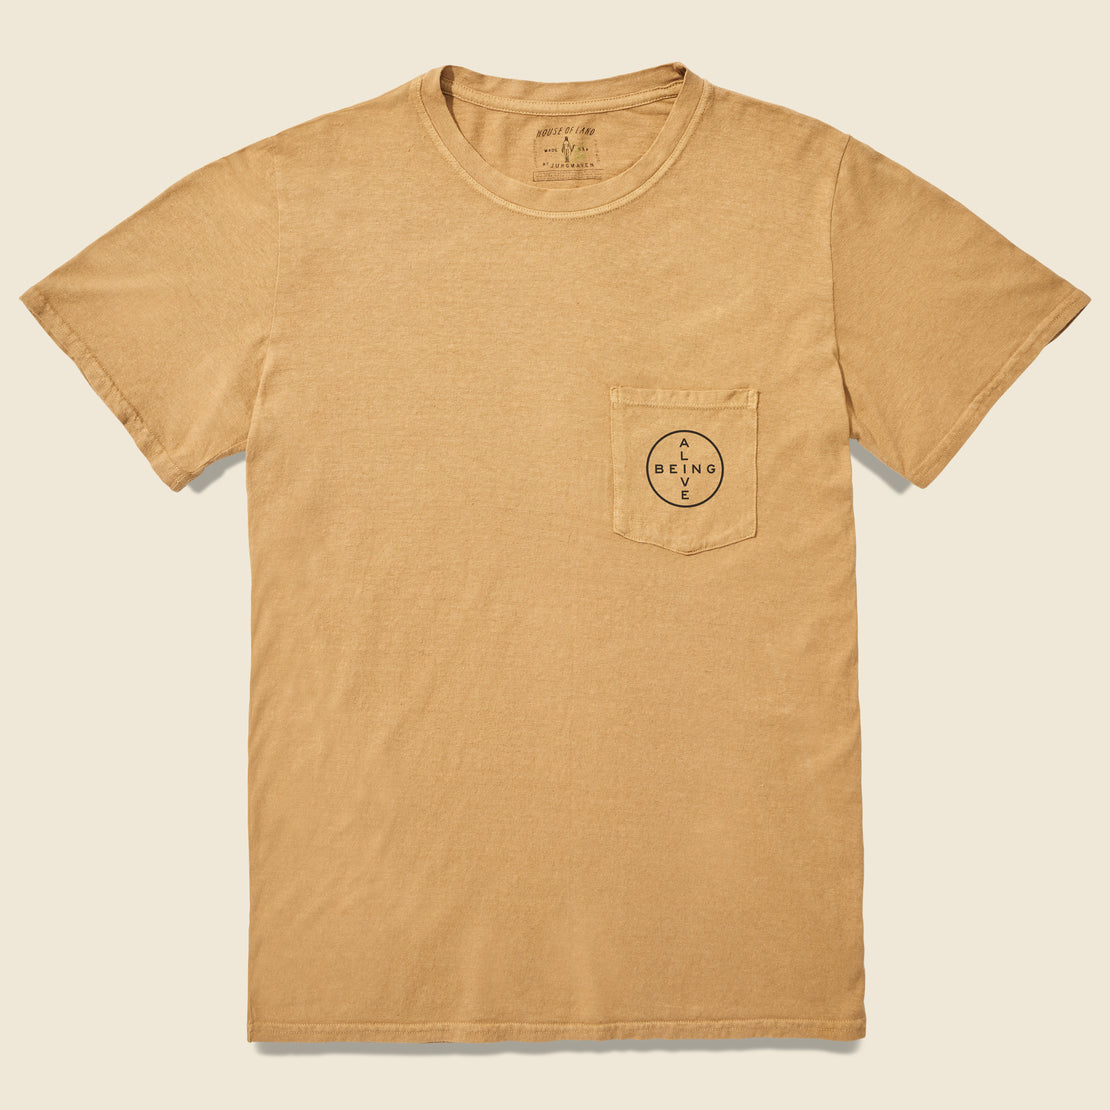 House of LAND Being Alive Tee - Tan